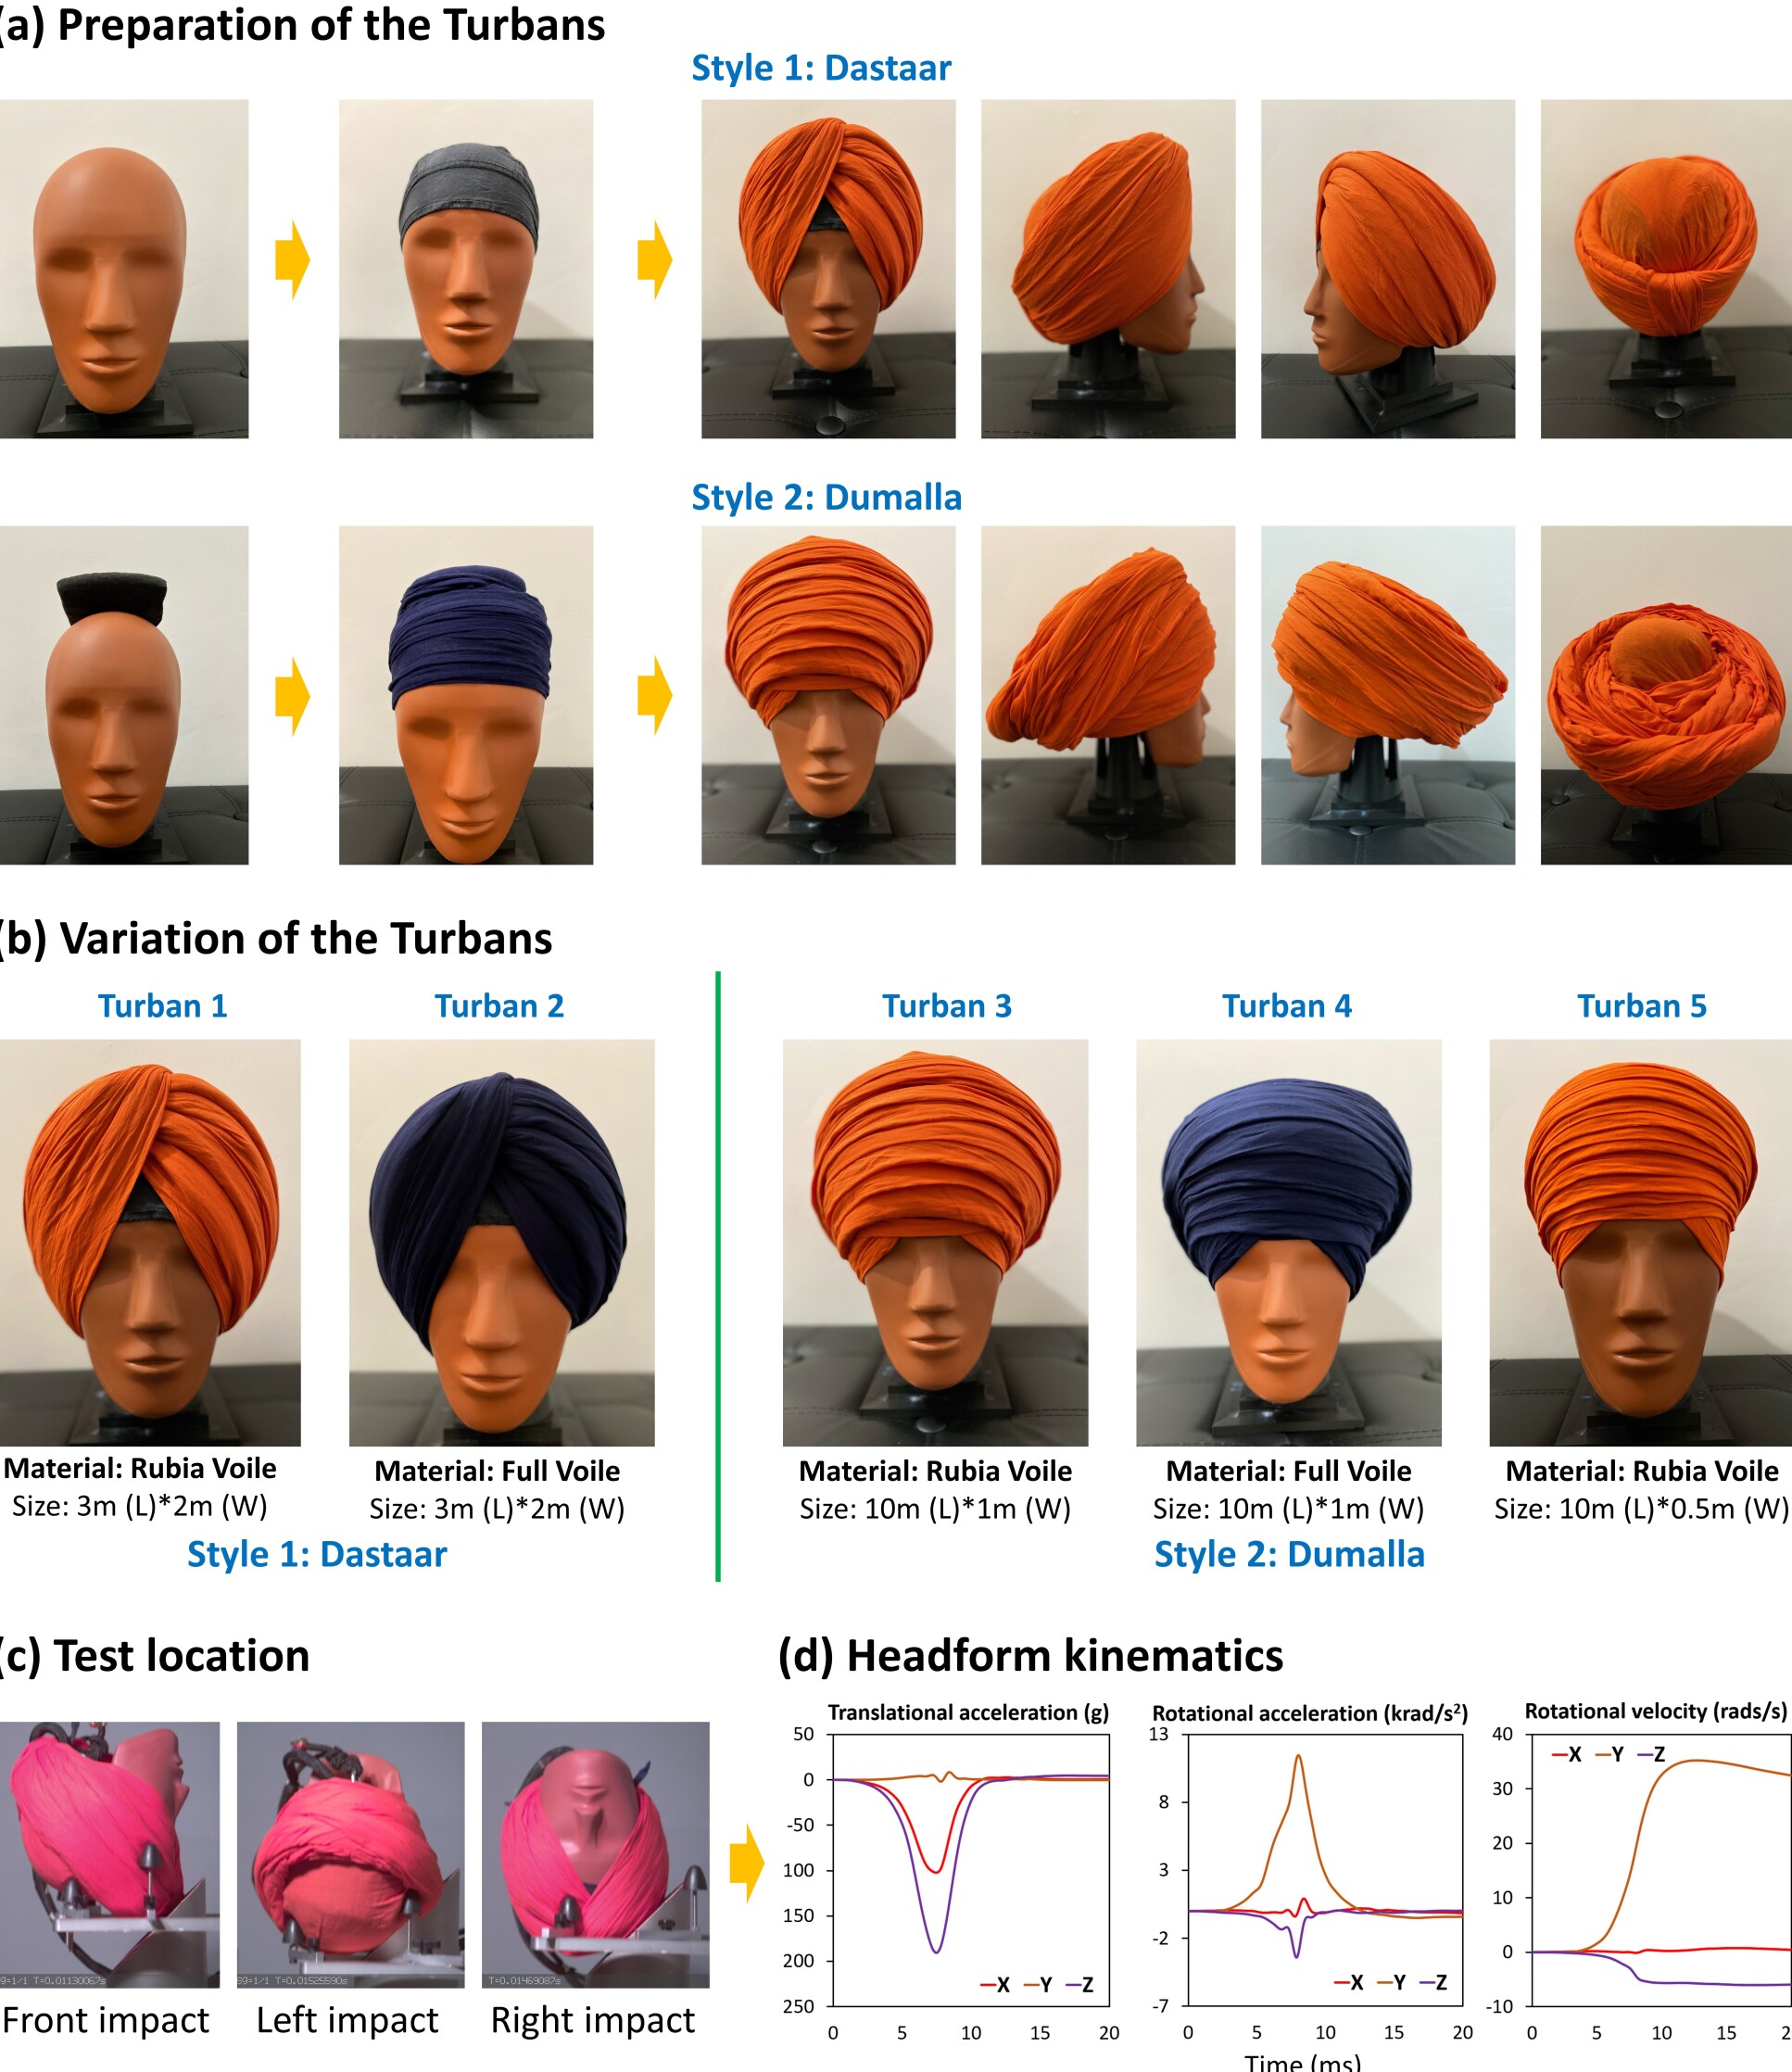 Photos and images showing the study set-up, including the different turban styles, on crash test dummy heads